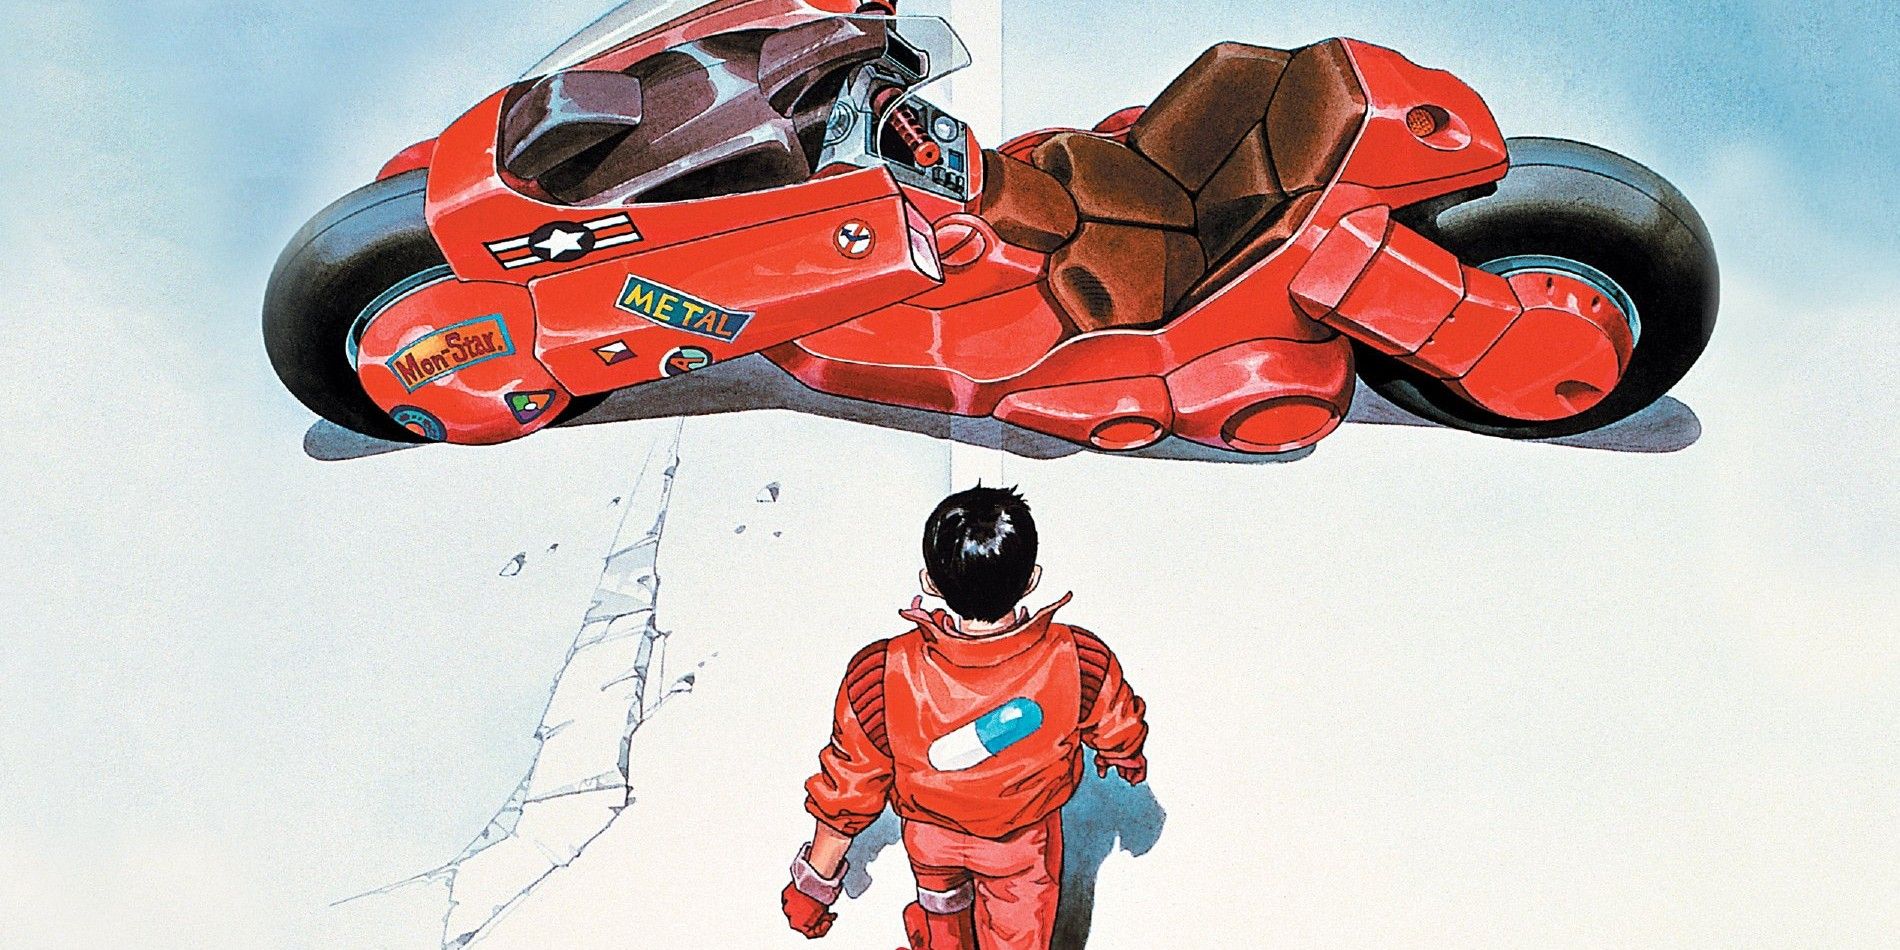 New Akira Anime Series In The Works From Original Creator